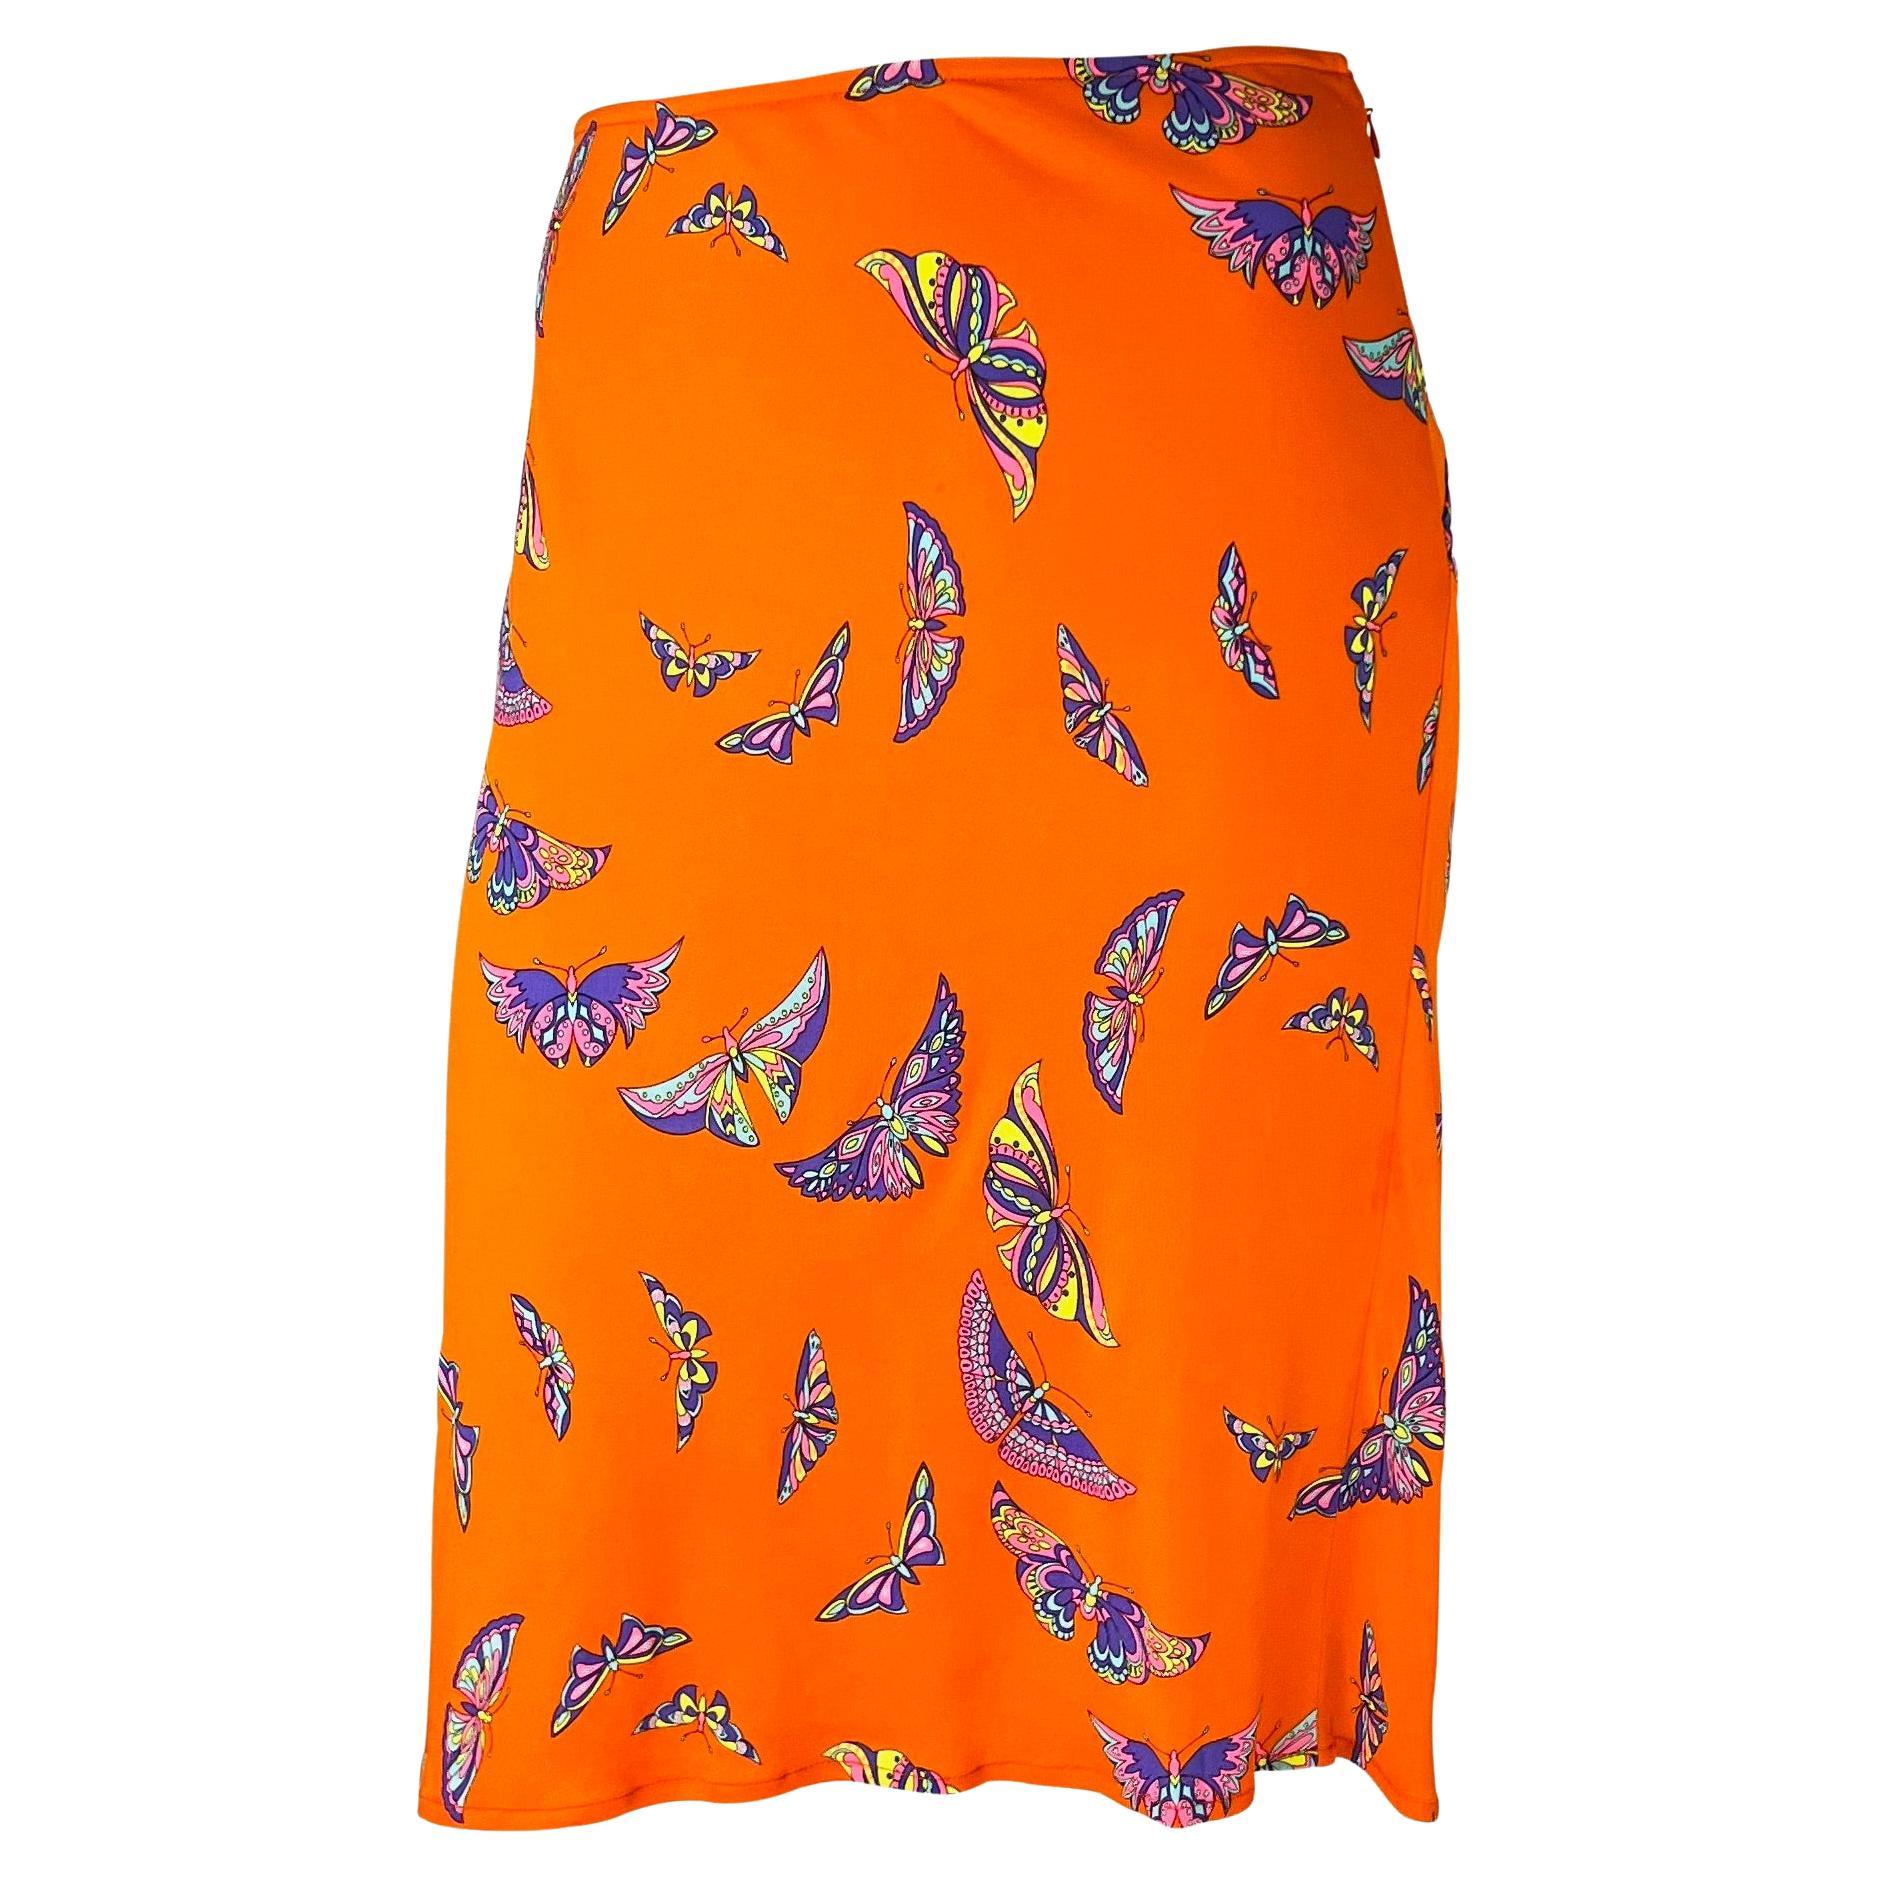 Presenting a bright orange Gianni Versace Couture skirt, designed by Donatella Versace. From the late 1990s, this orange handkerchief-style skirt is covered in multicolored butterflies. With a hippy-inspired feel, this is the perfect vibrant piece